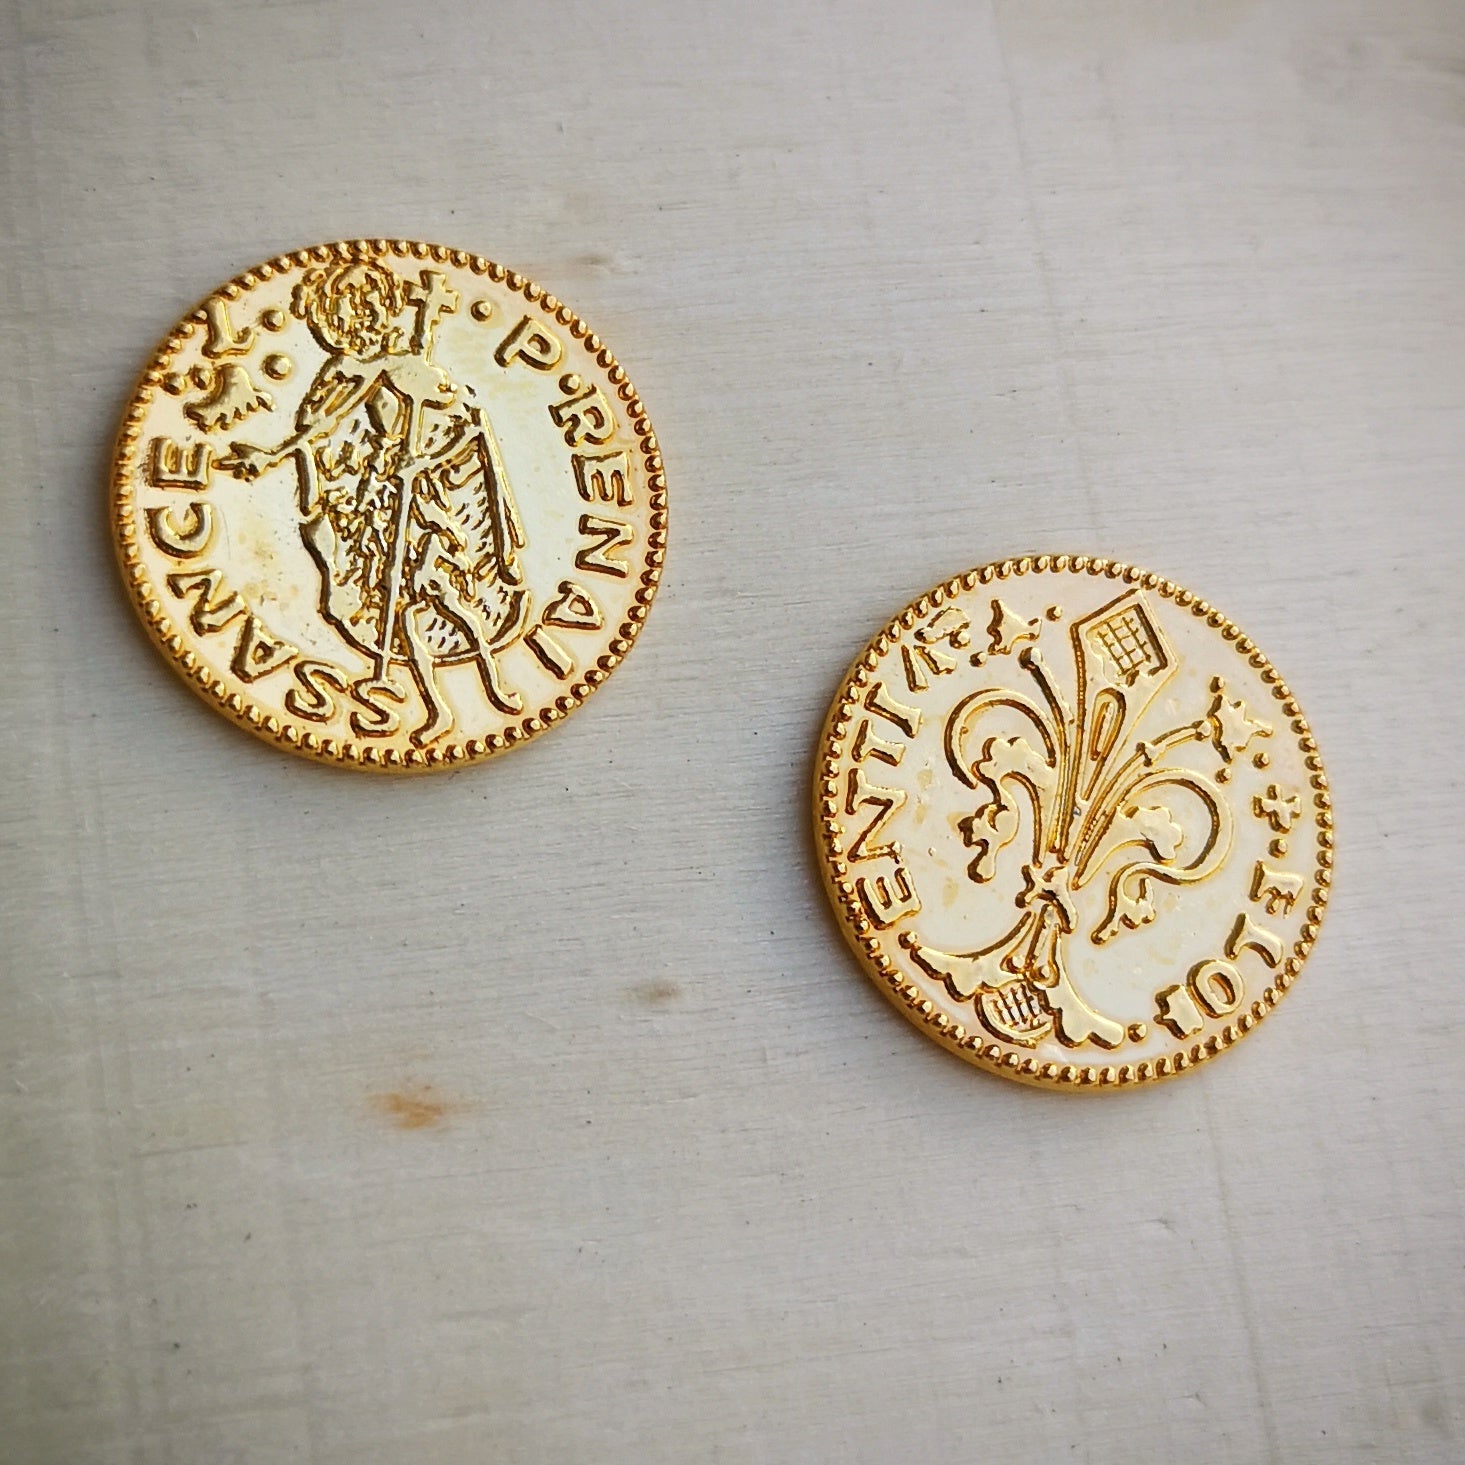 Expanded view of two metal game coins